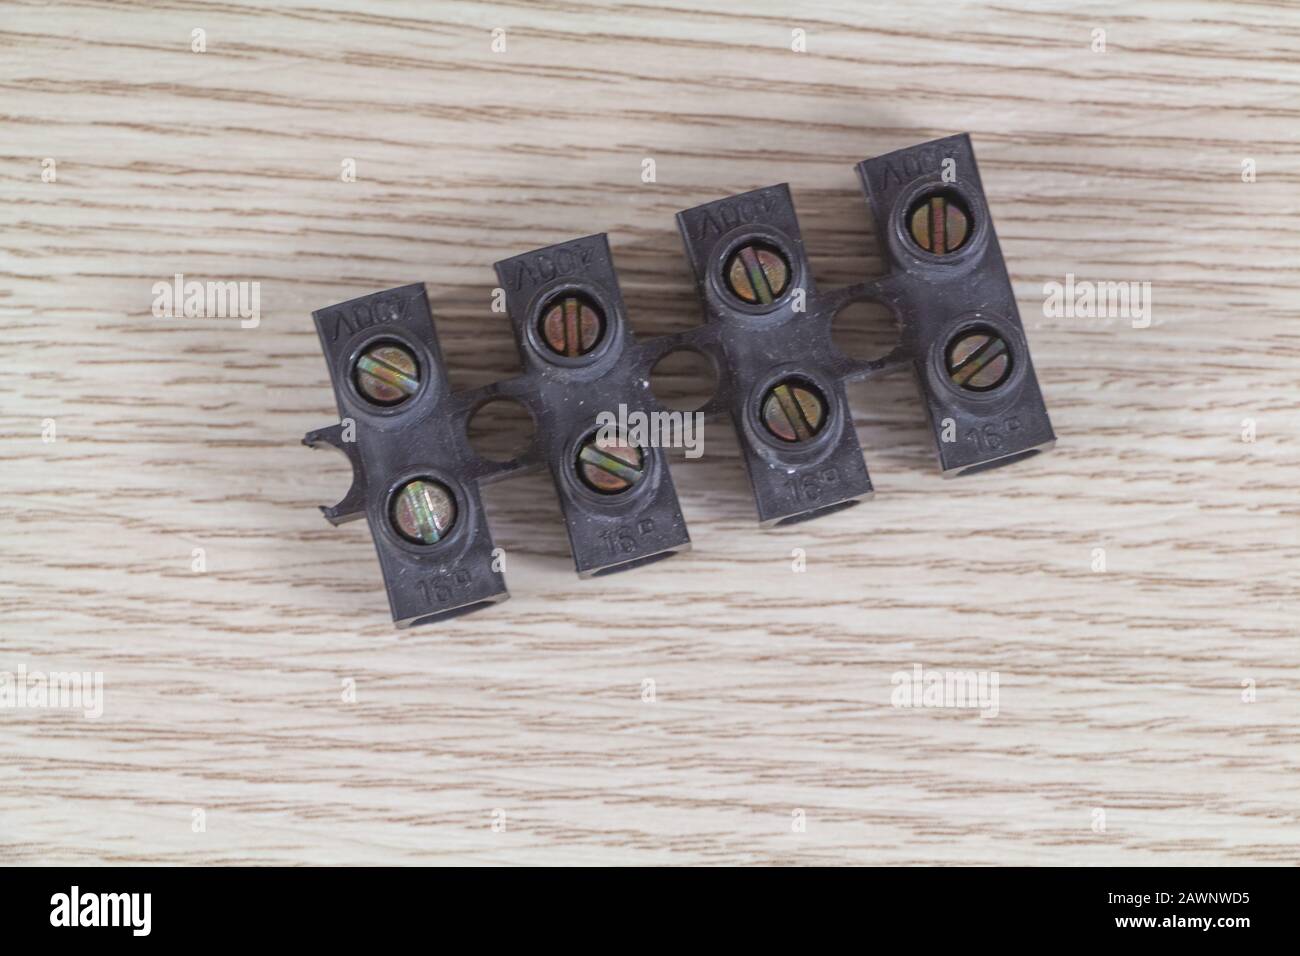 Black connecting block for connecting wires on wooden background Stock Photo